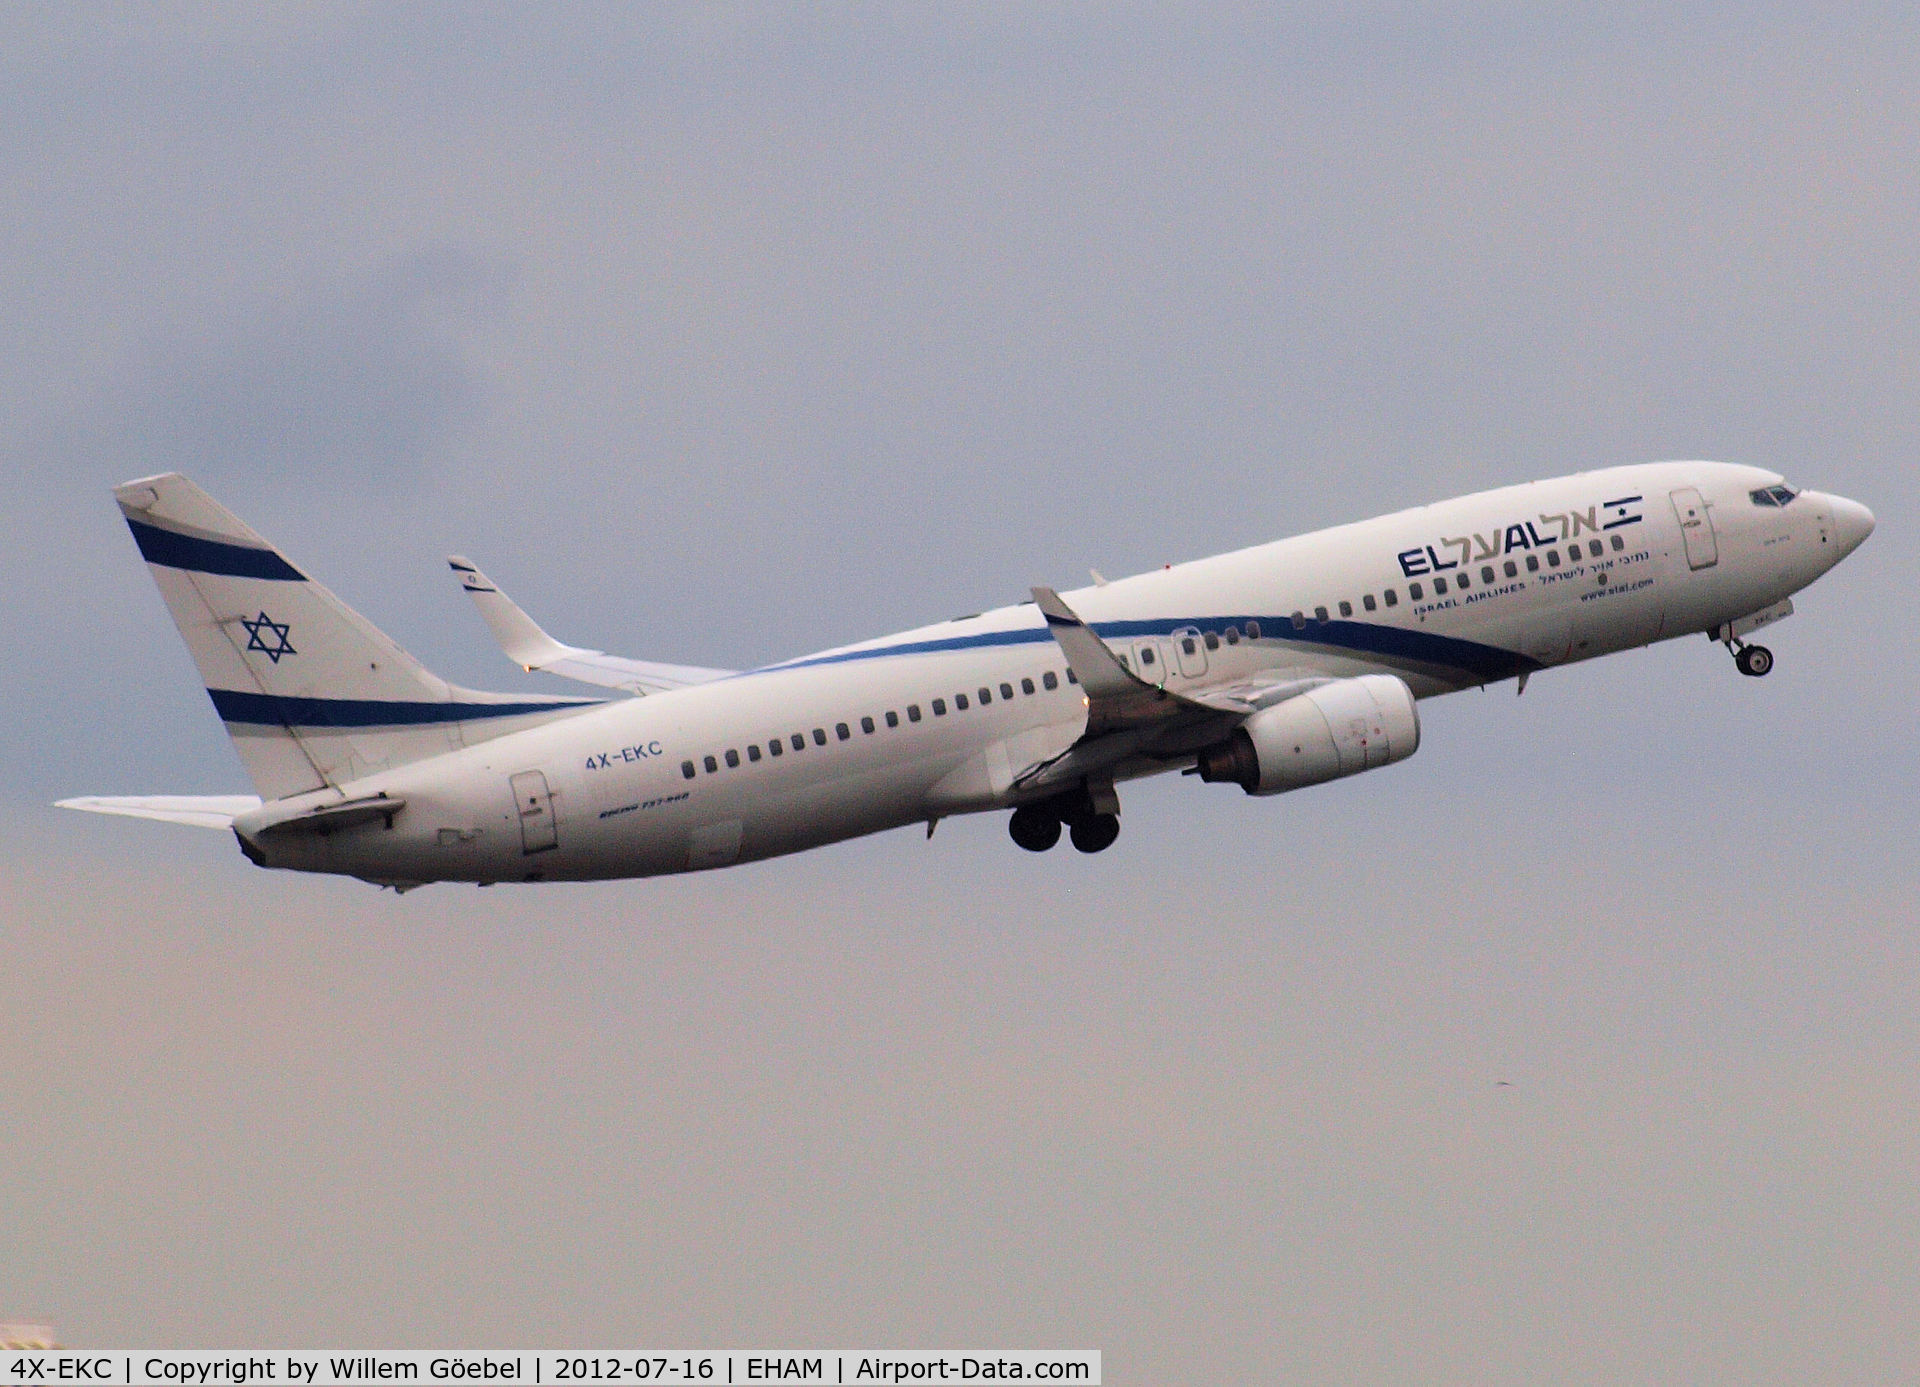 4X-EKC, 1999 Boeing 737-858 C/N 29959, Take off from runway L18 of Schiphol Airport